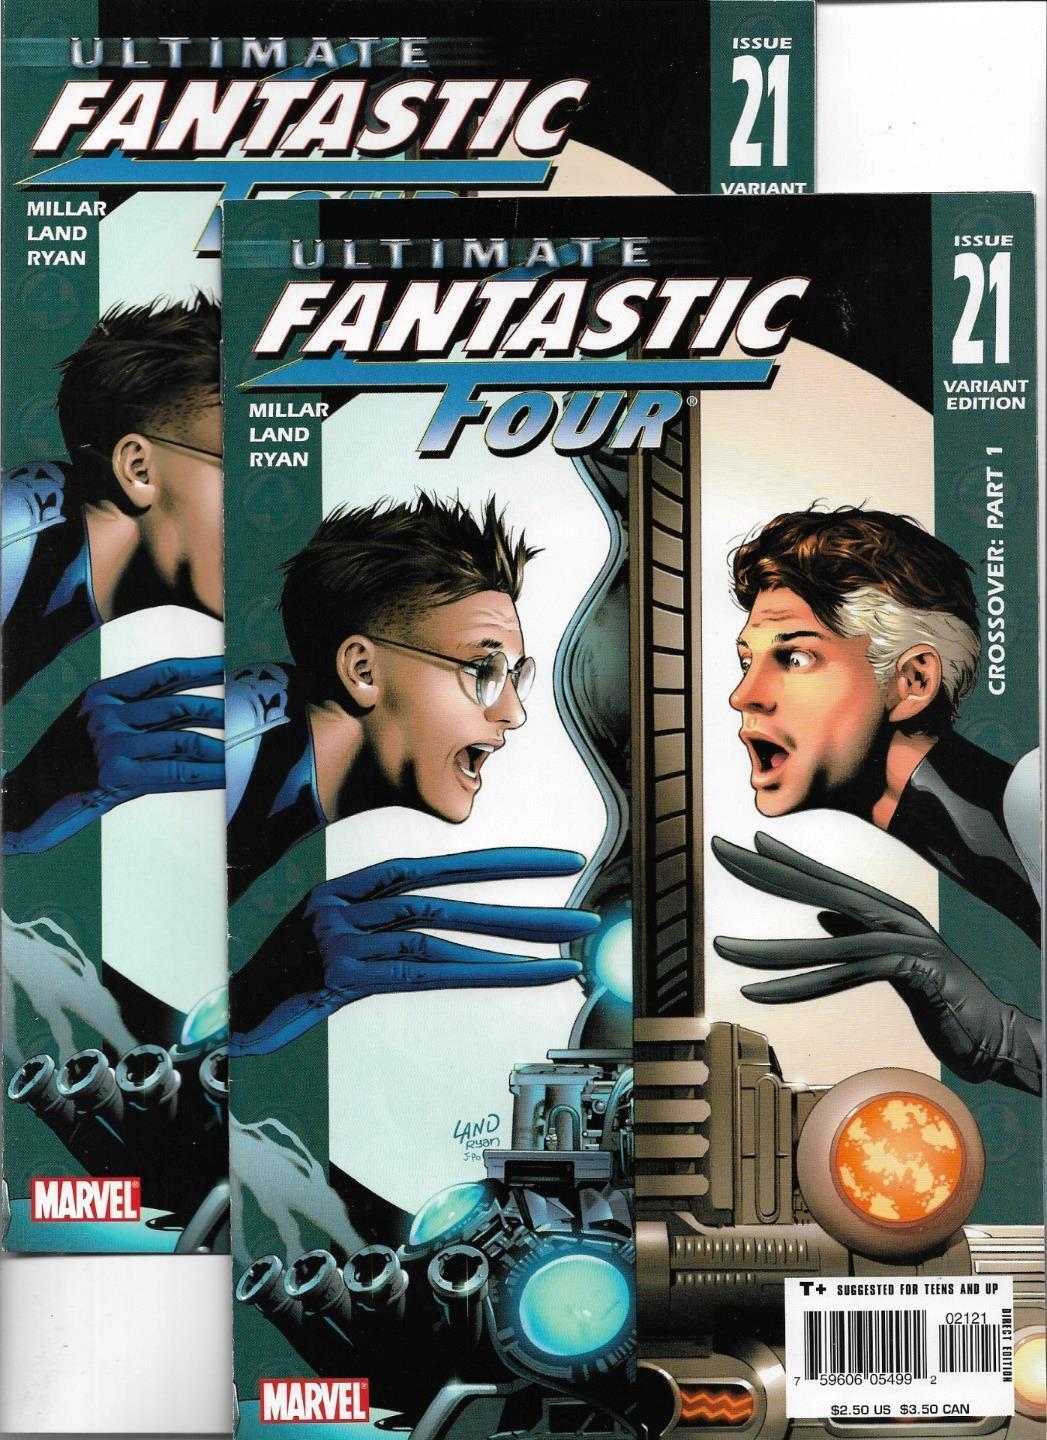 ULTIMATE FANTASTIC FOUR #21 2005 VERY FINE- 7.5 4294 two issues